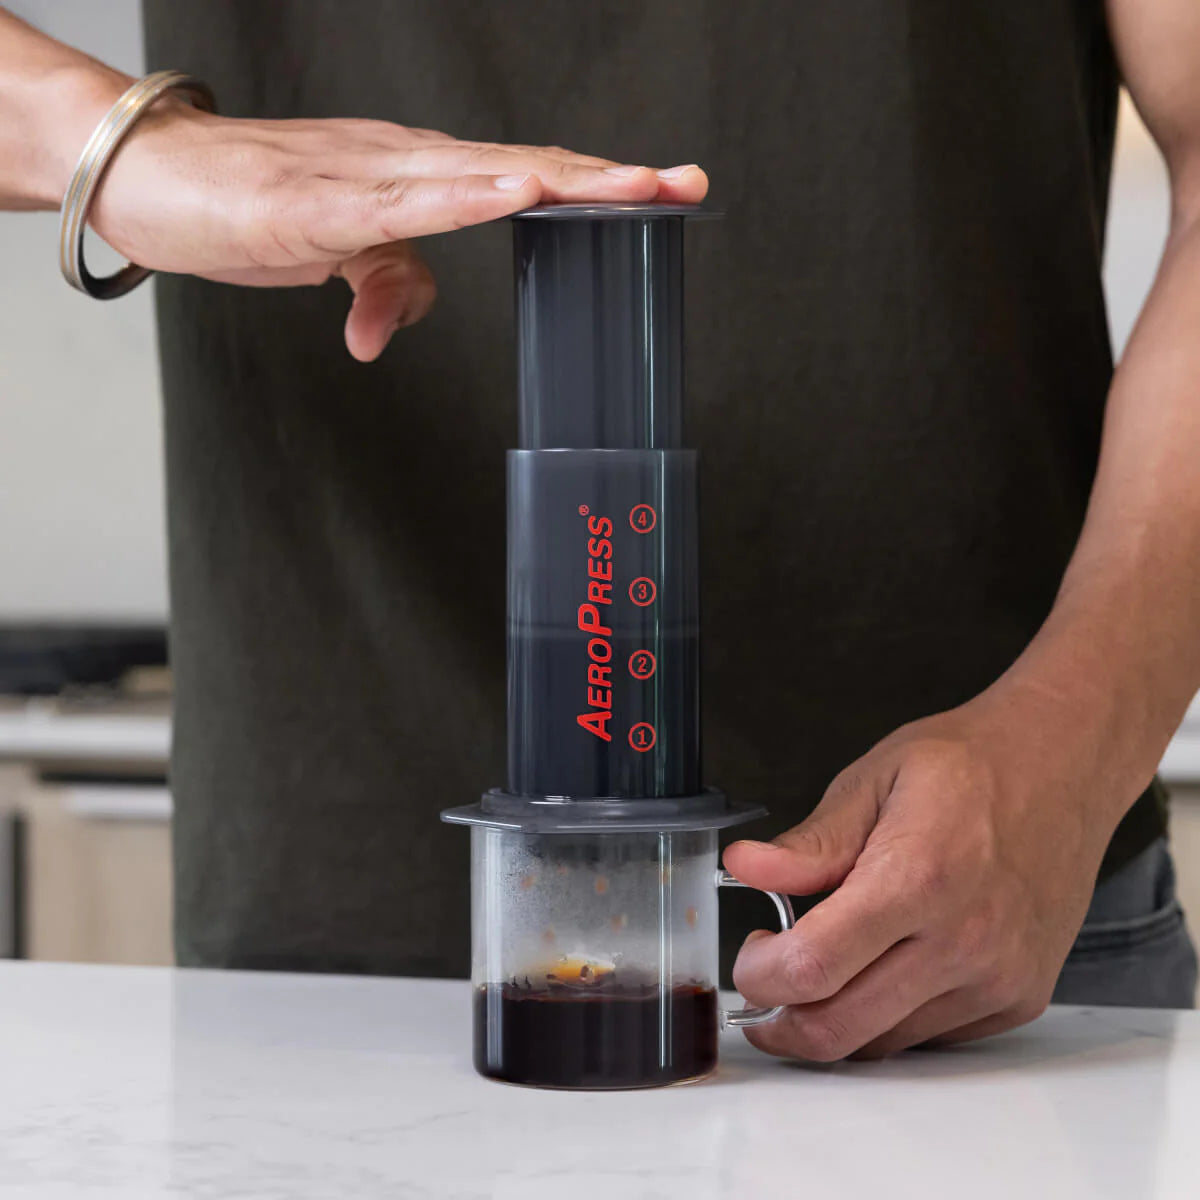 Make Cold Brew With Your AeroPress Coffee Maker